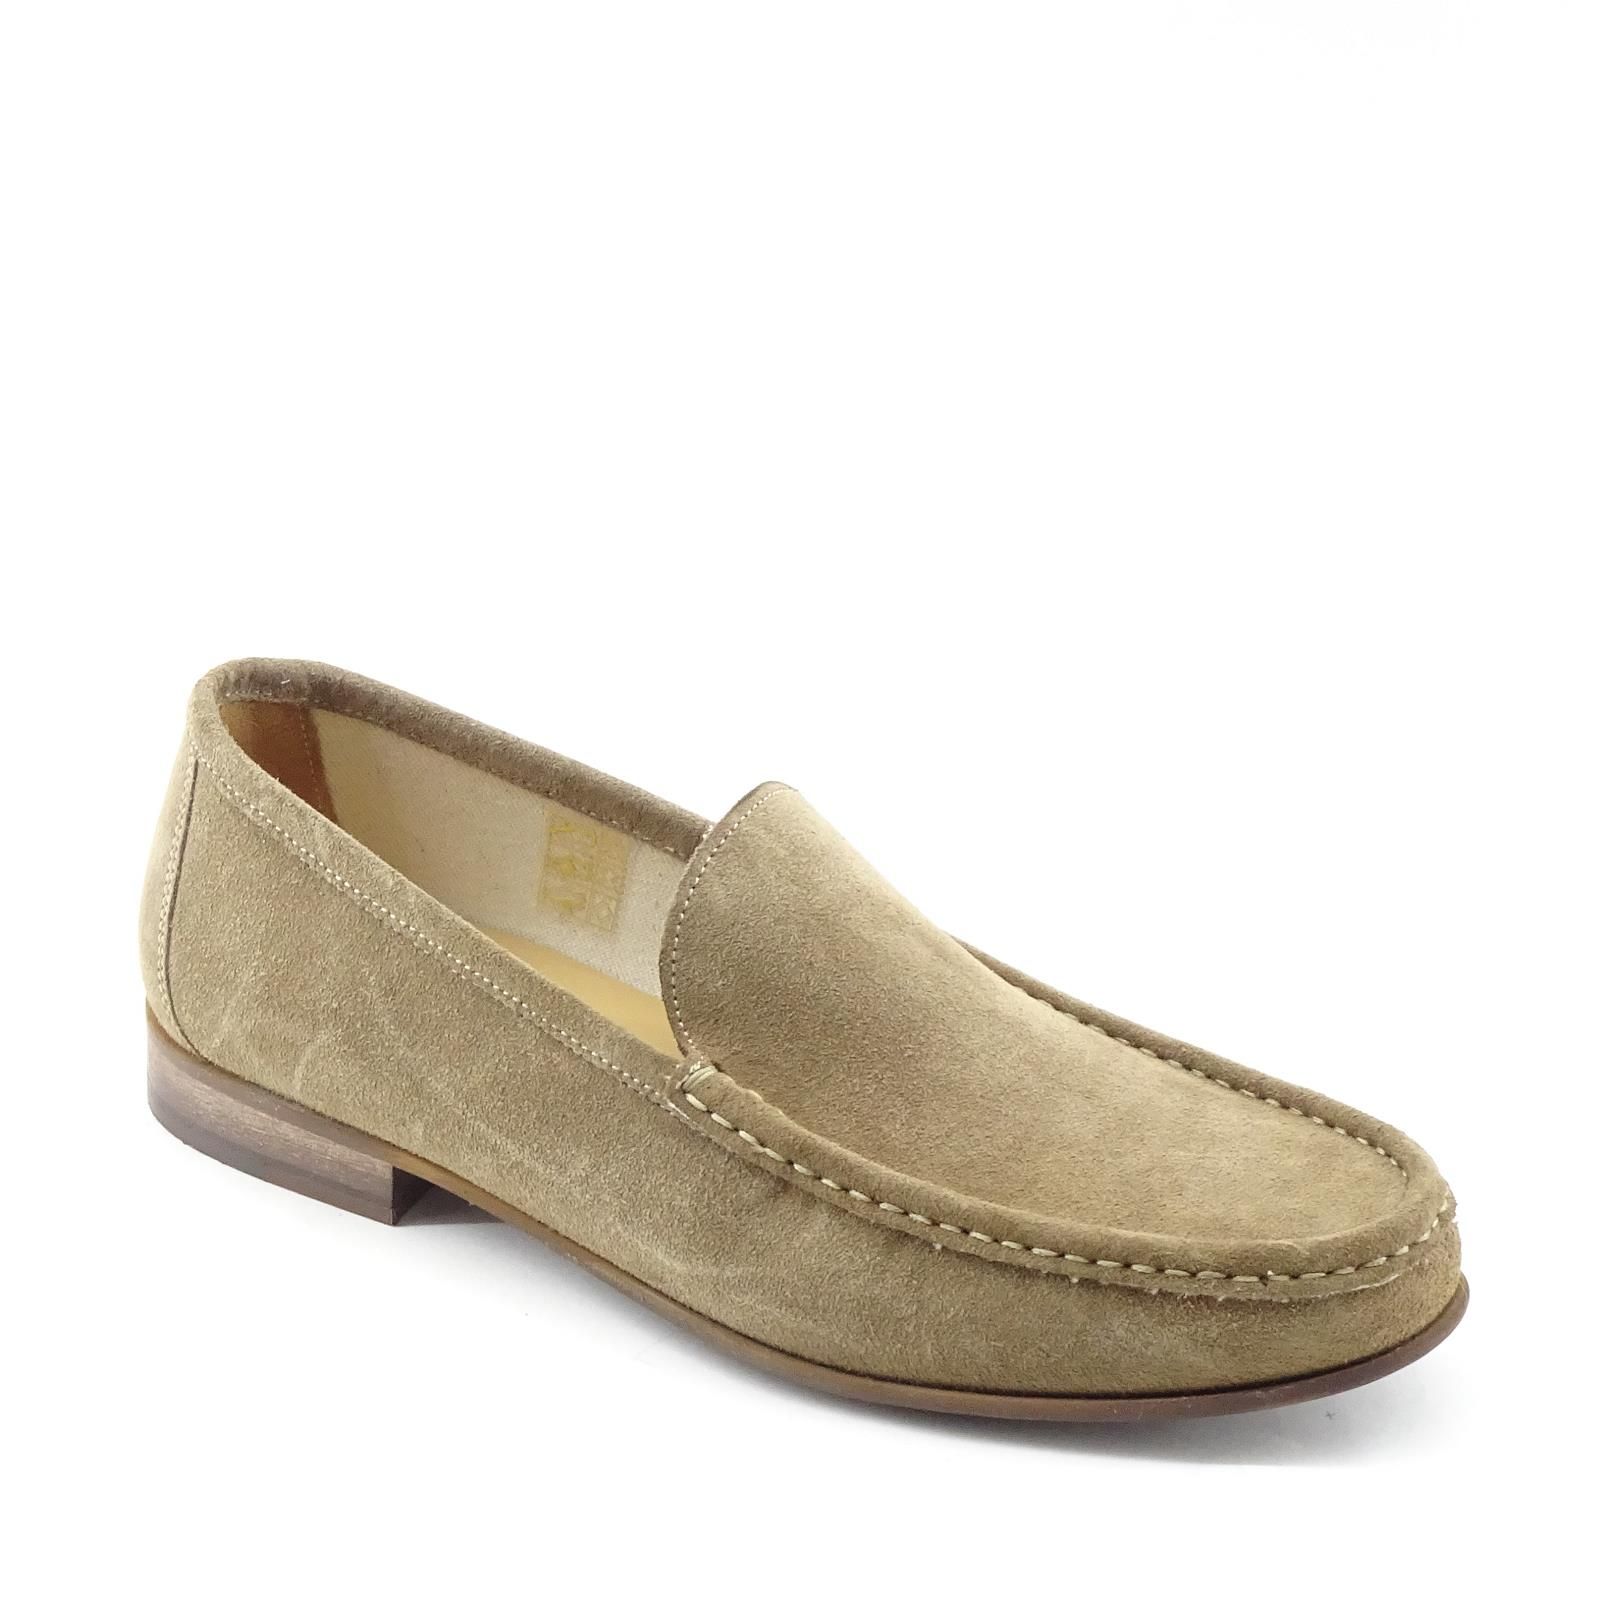 LORD KENT MOCASSIN TAUPE heren (LORD KENT MOC TAUPE - 8384) - Schoenen Levine